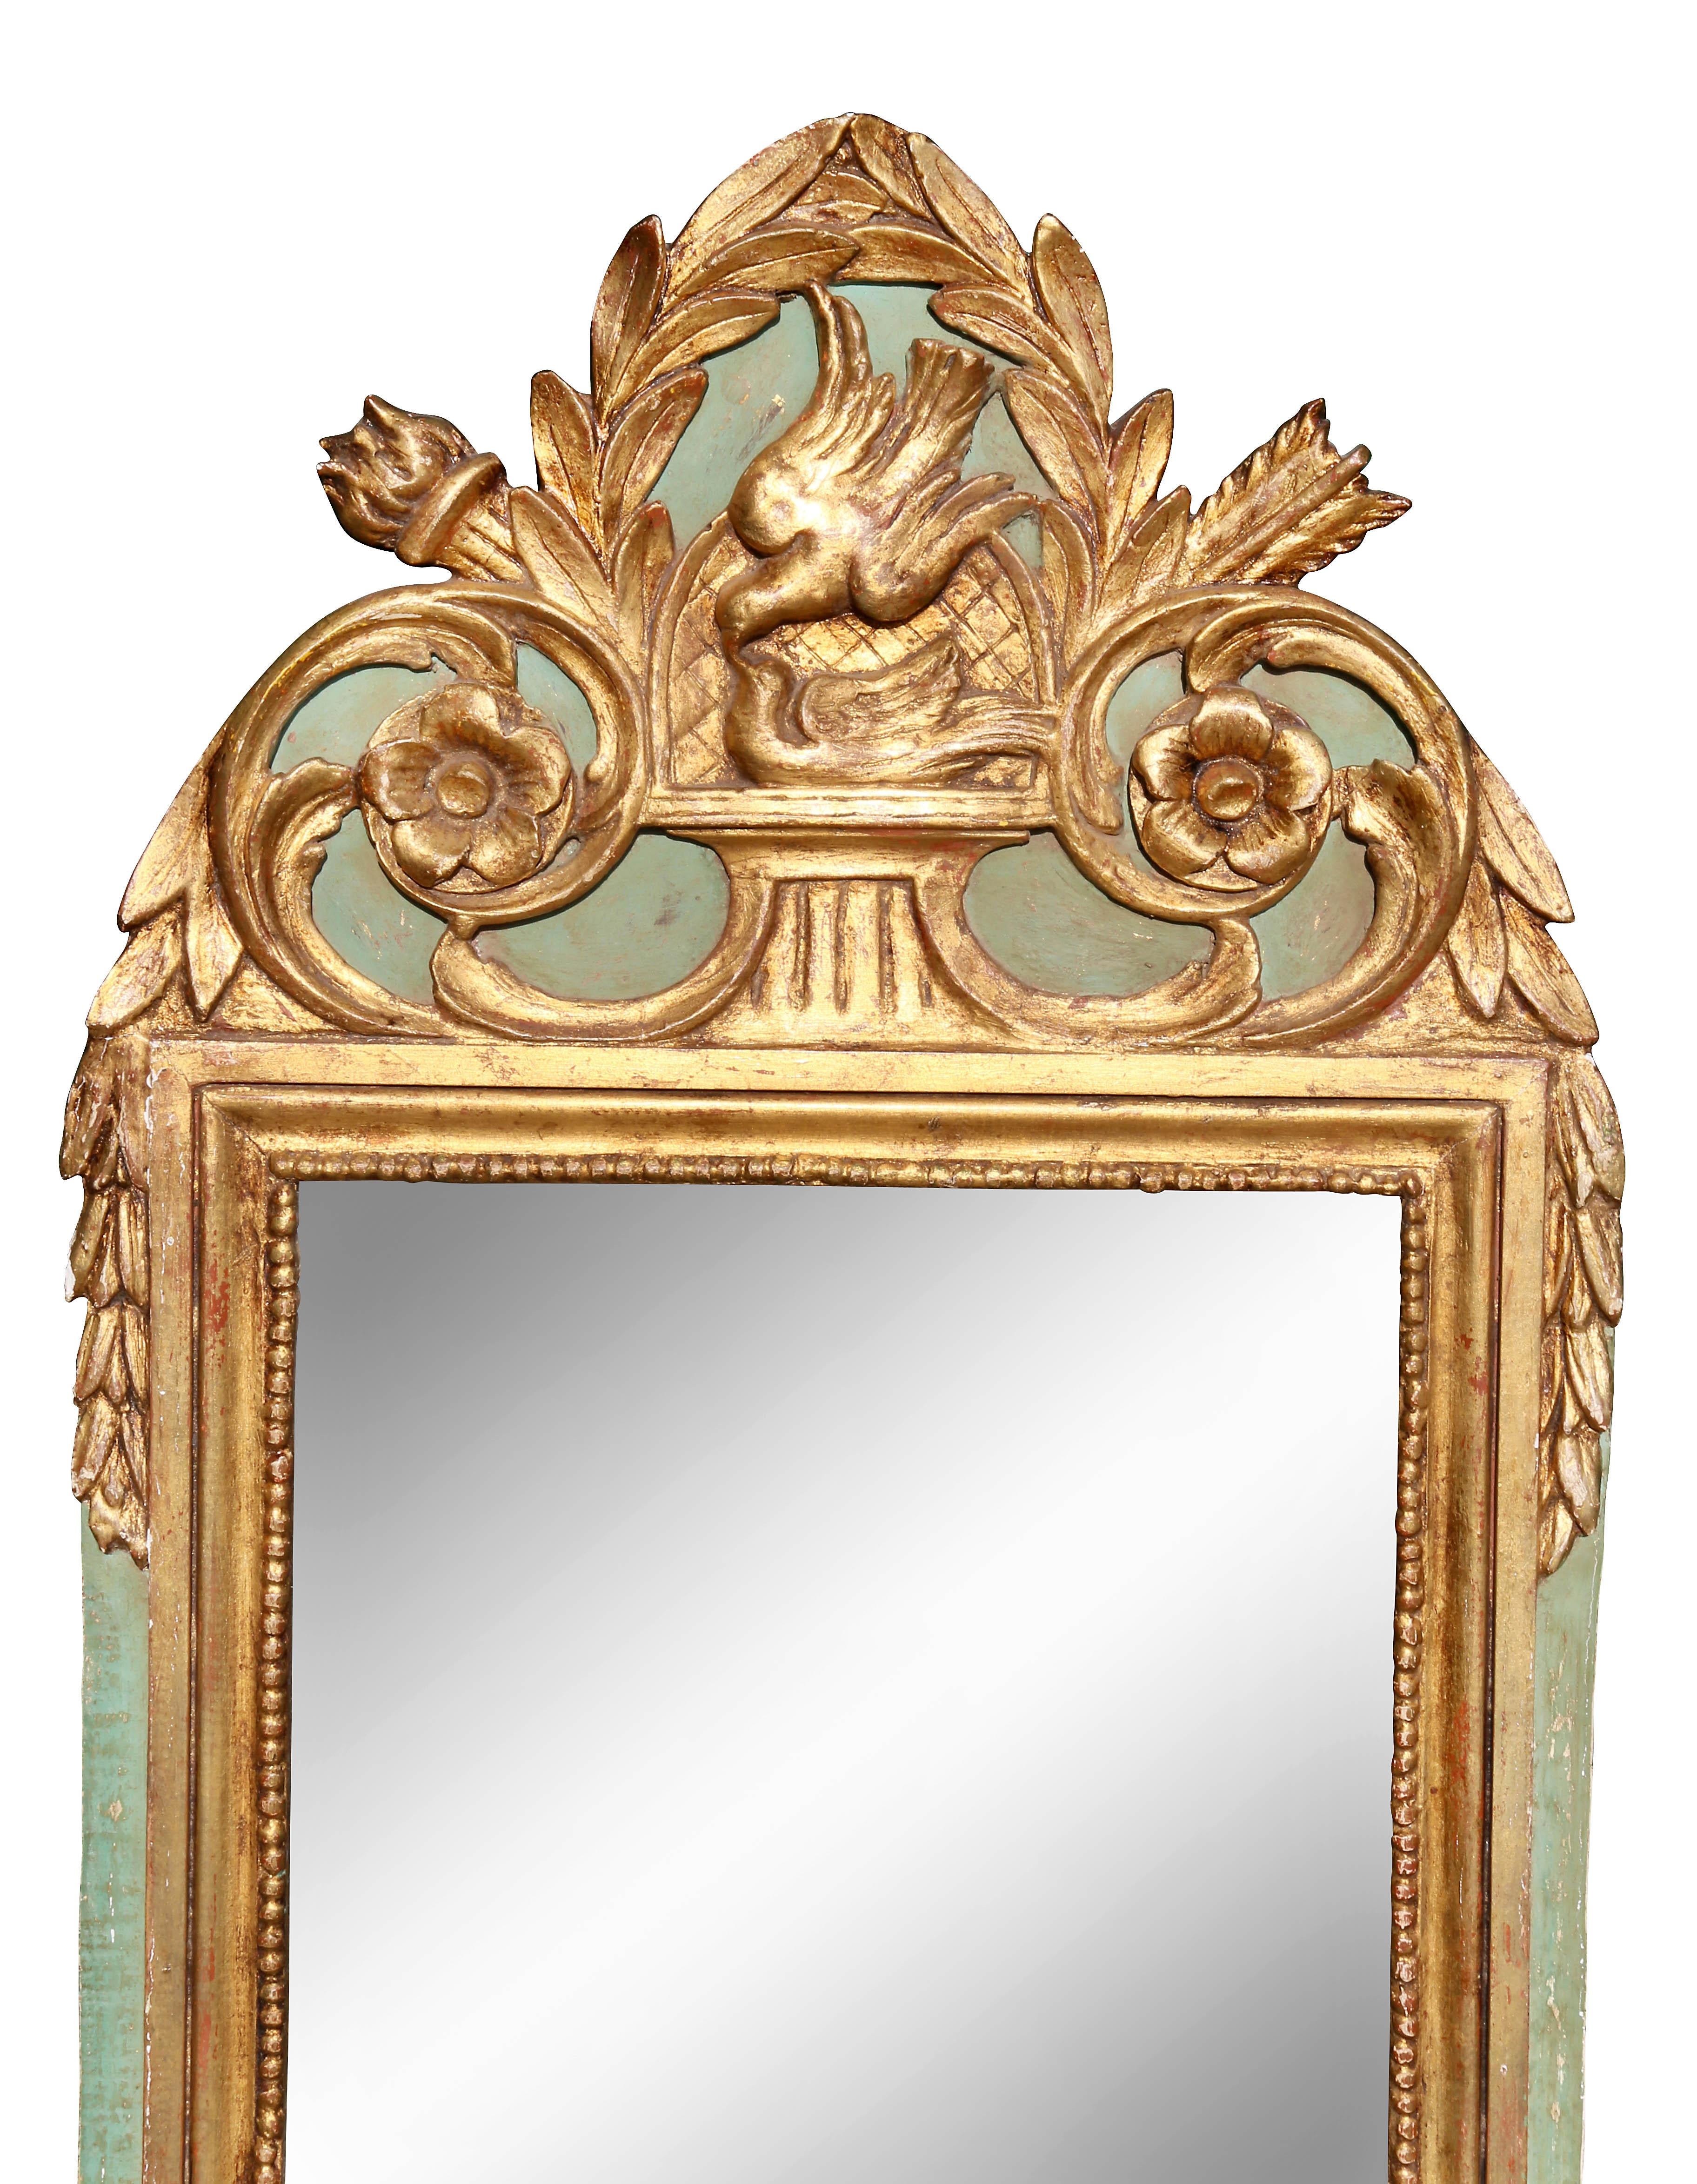 With laurel leaf with central bird crest over a mirror set in a conforming frame.